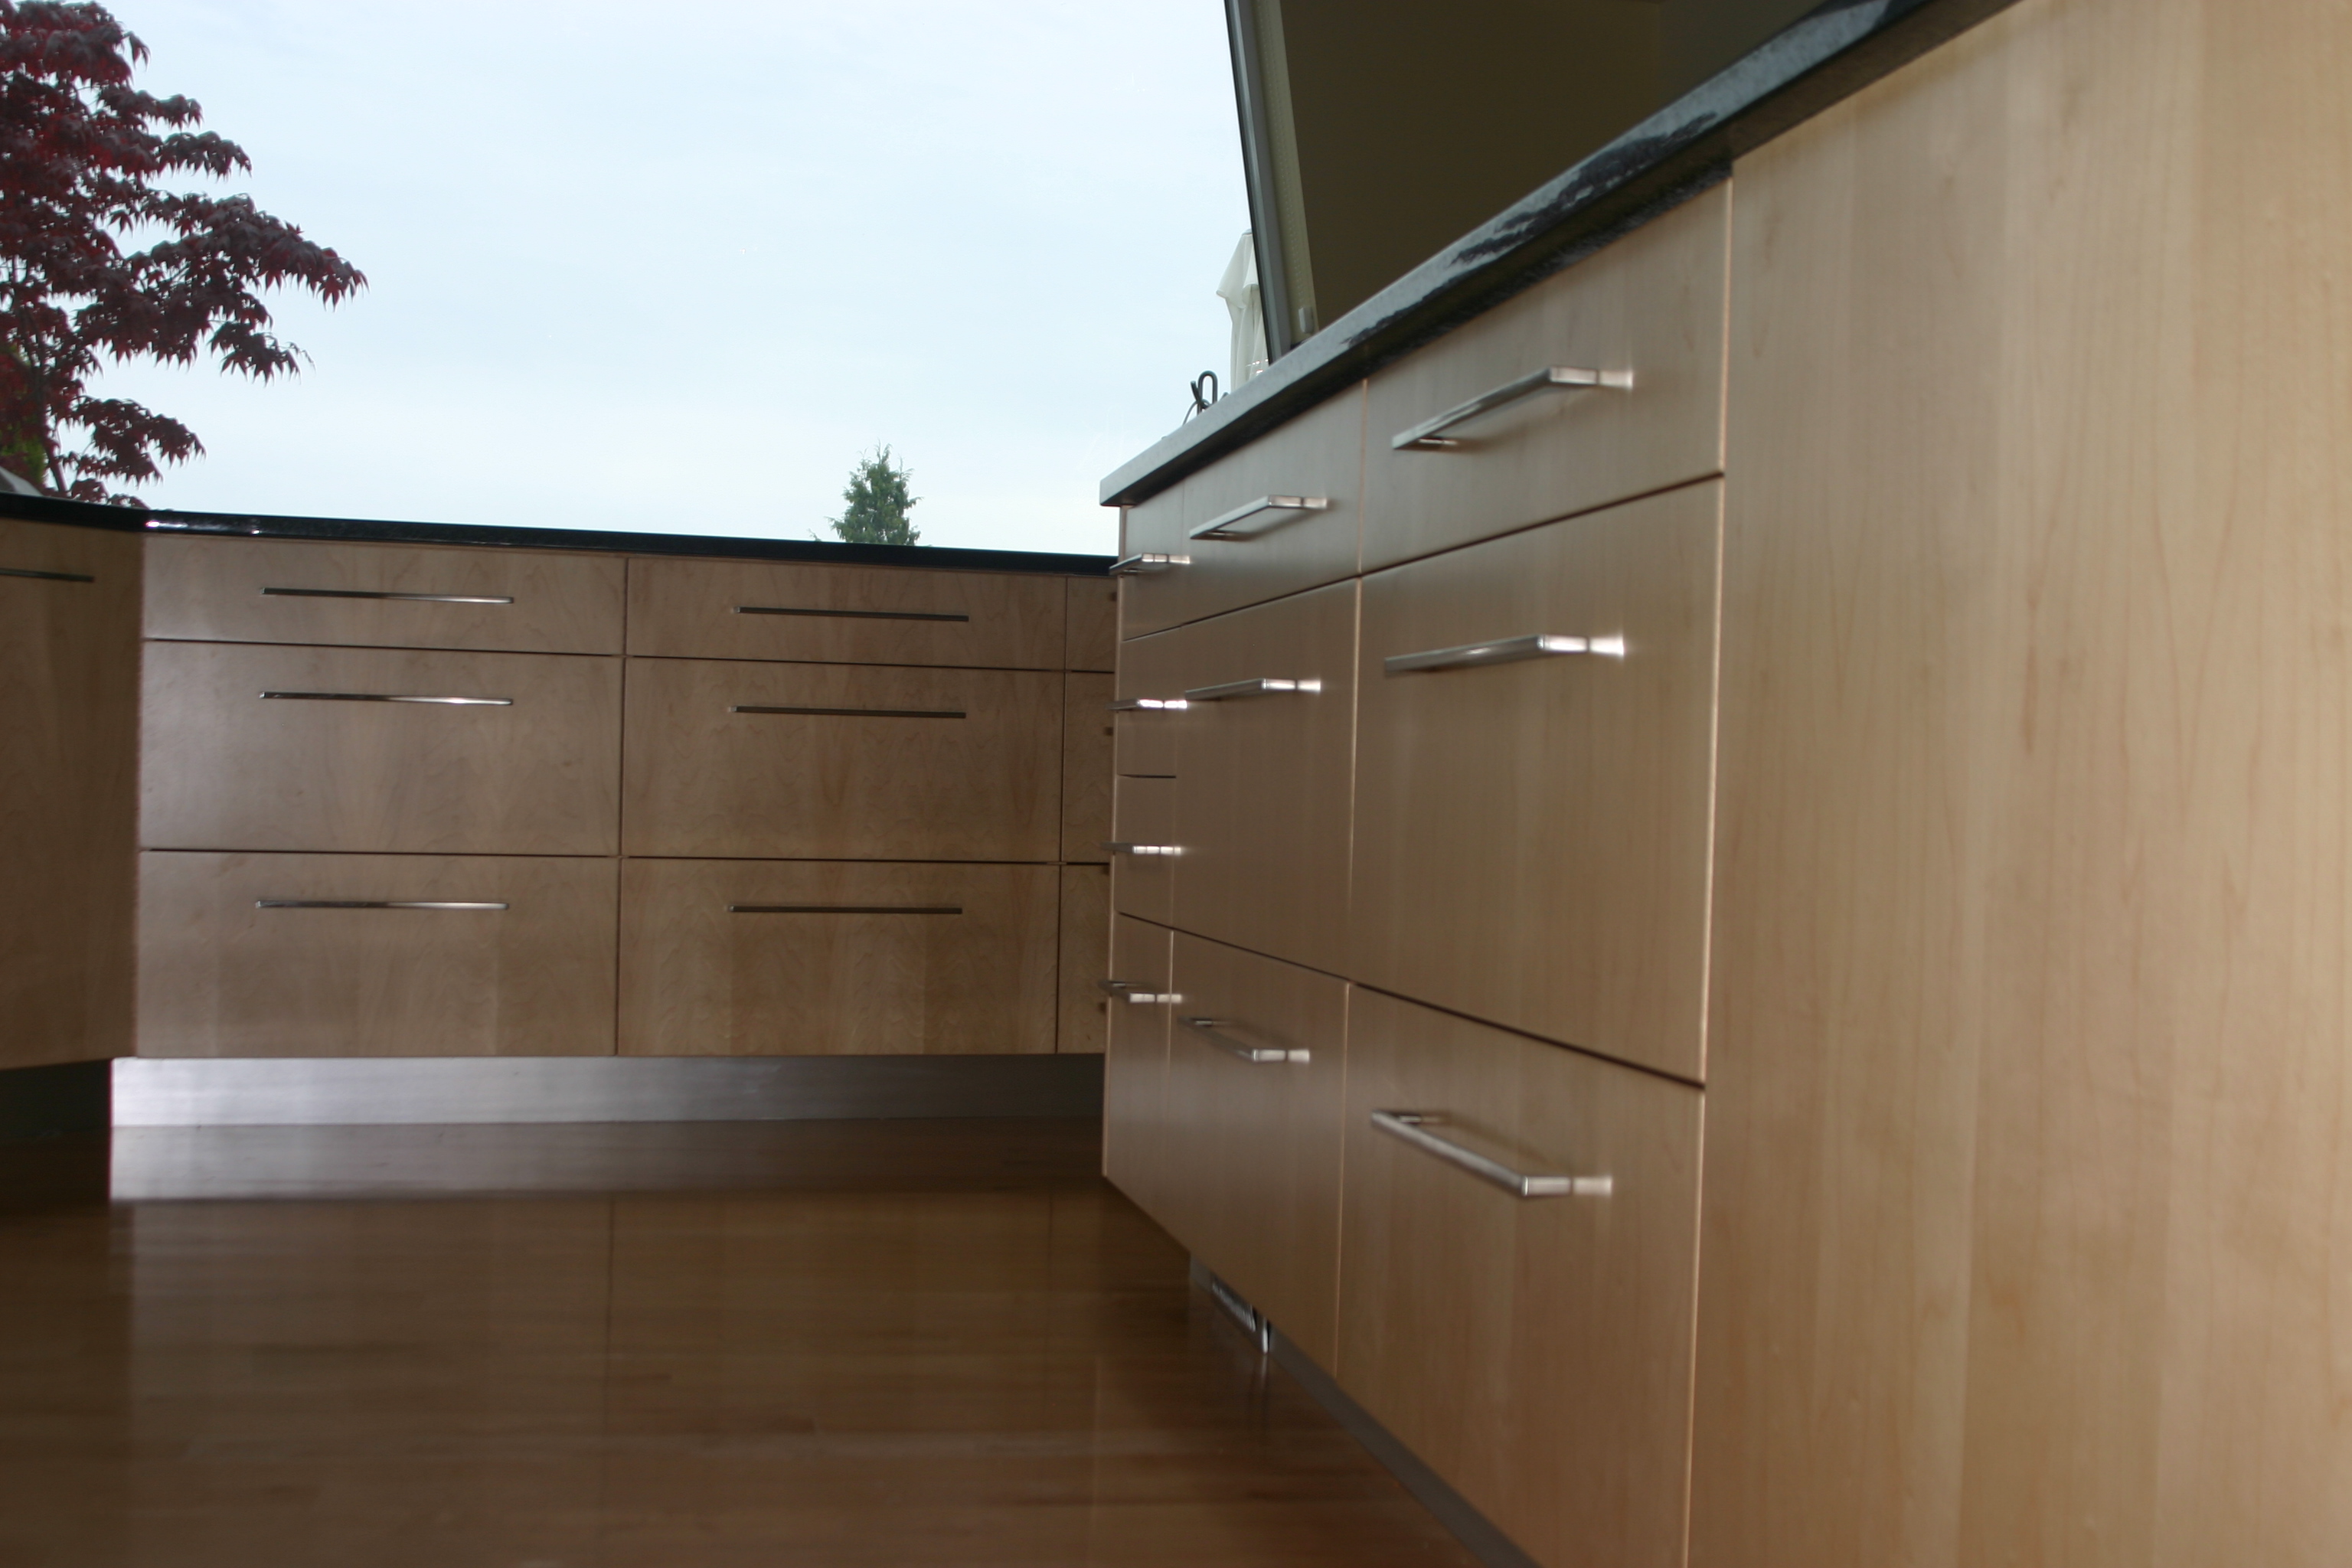 New full extension/soft close drawers retrofitted into island cabinetry